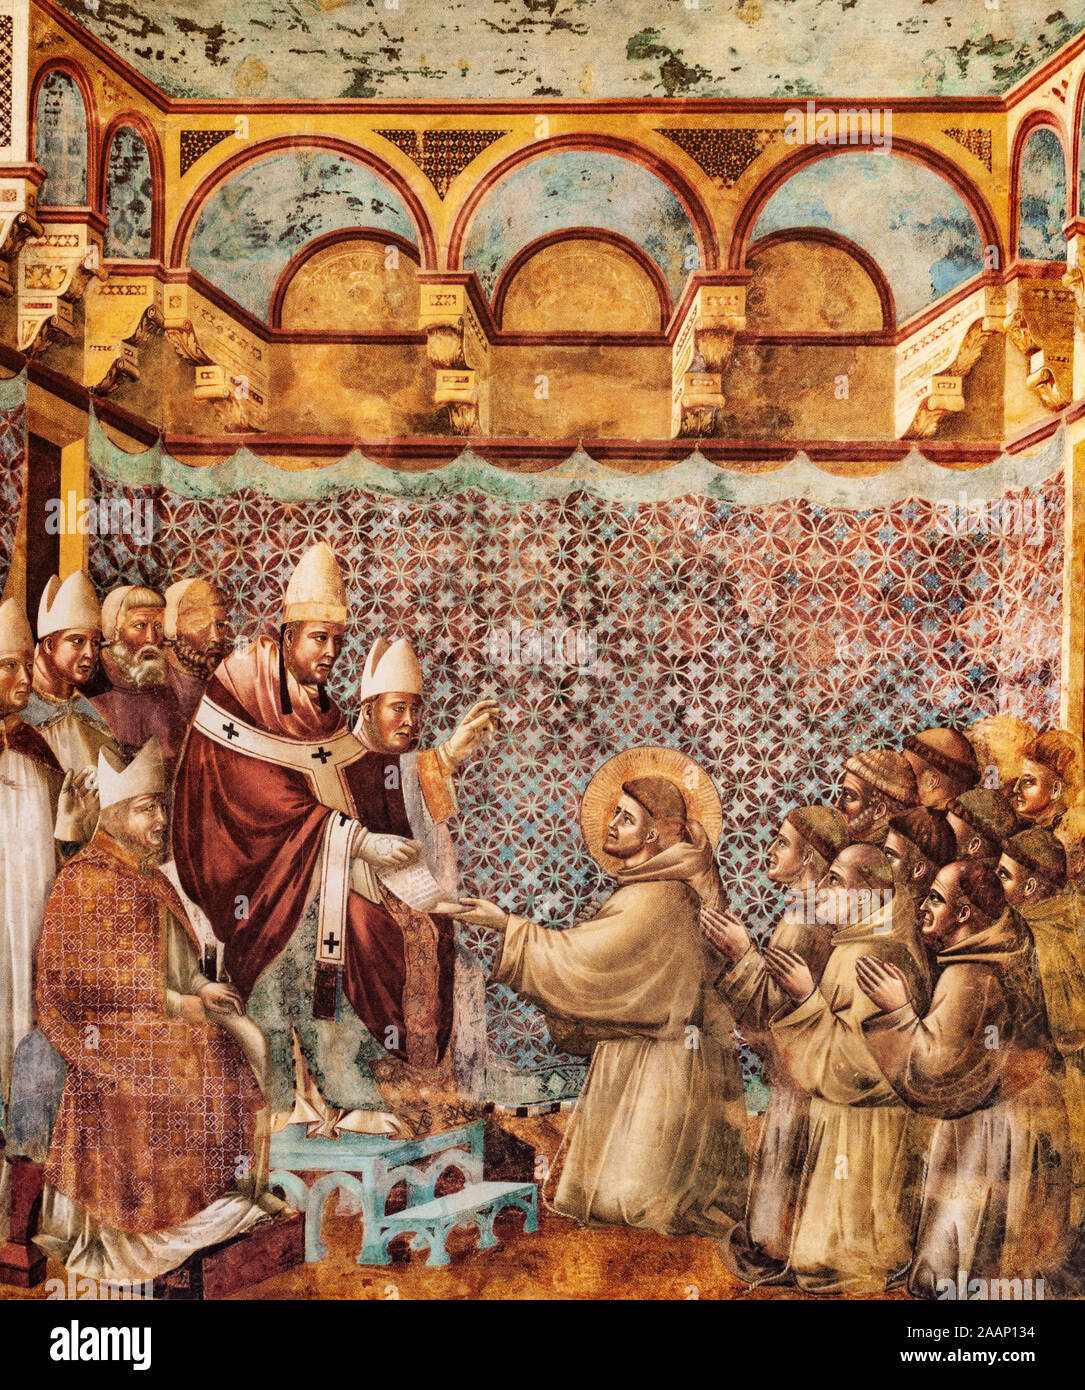 A fresco painting in the upper Basilica of Assisi, probably a work by Giotto di Bondone (1266-1337) shows Saint Francis of Assisi receiving confirmation of the admission of his religious community in 1210 from Pope Innocent III. Stock Photo